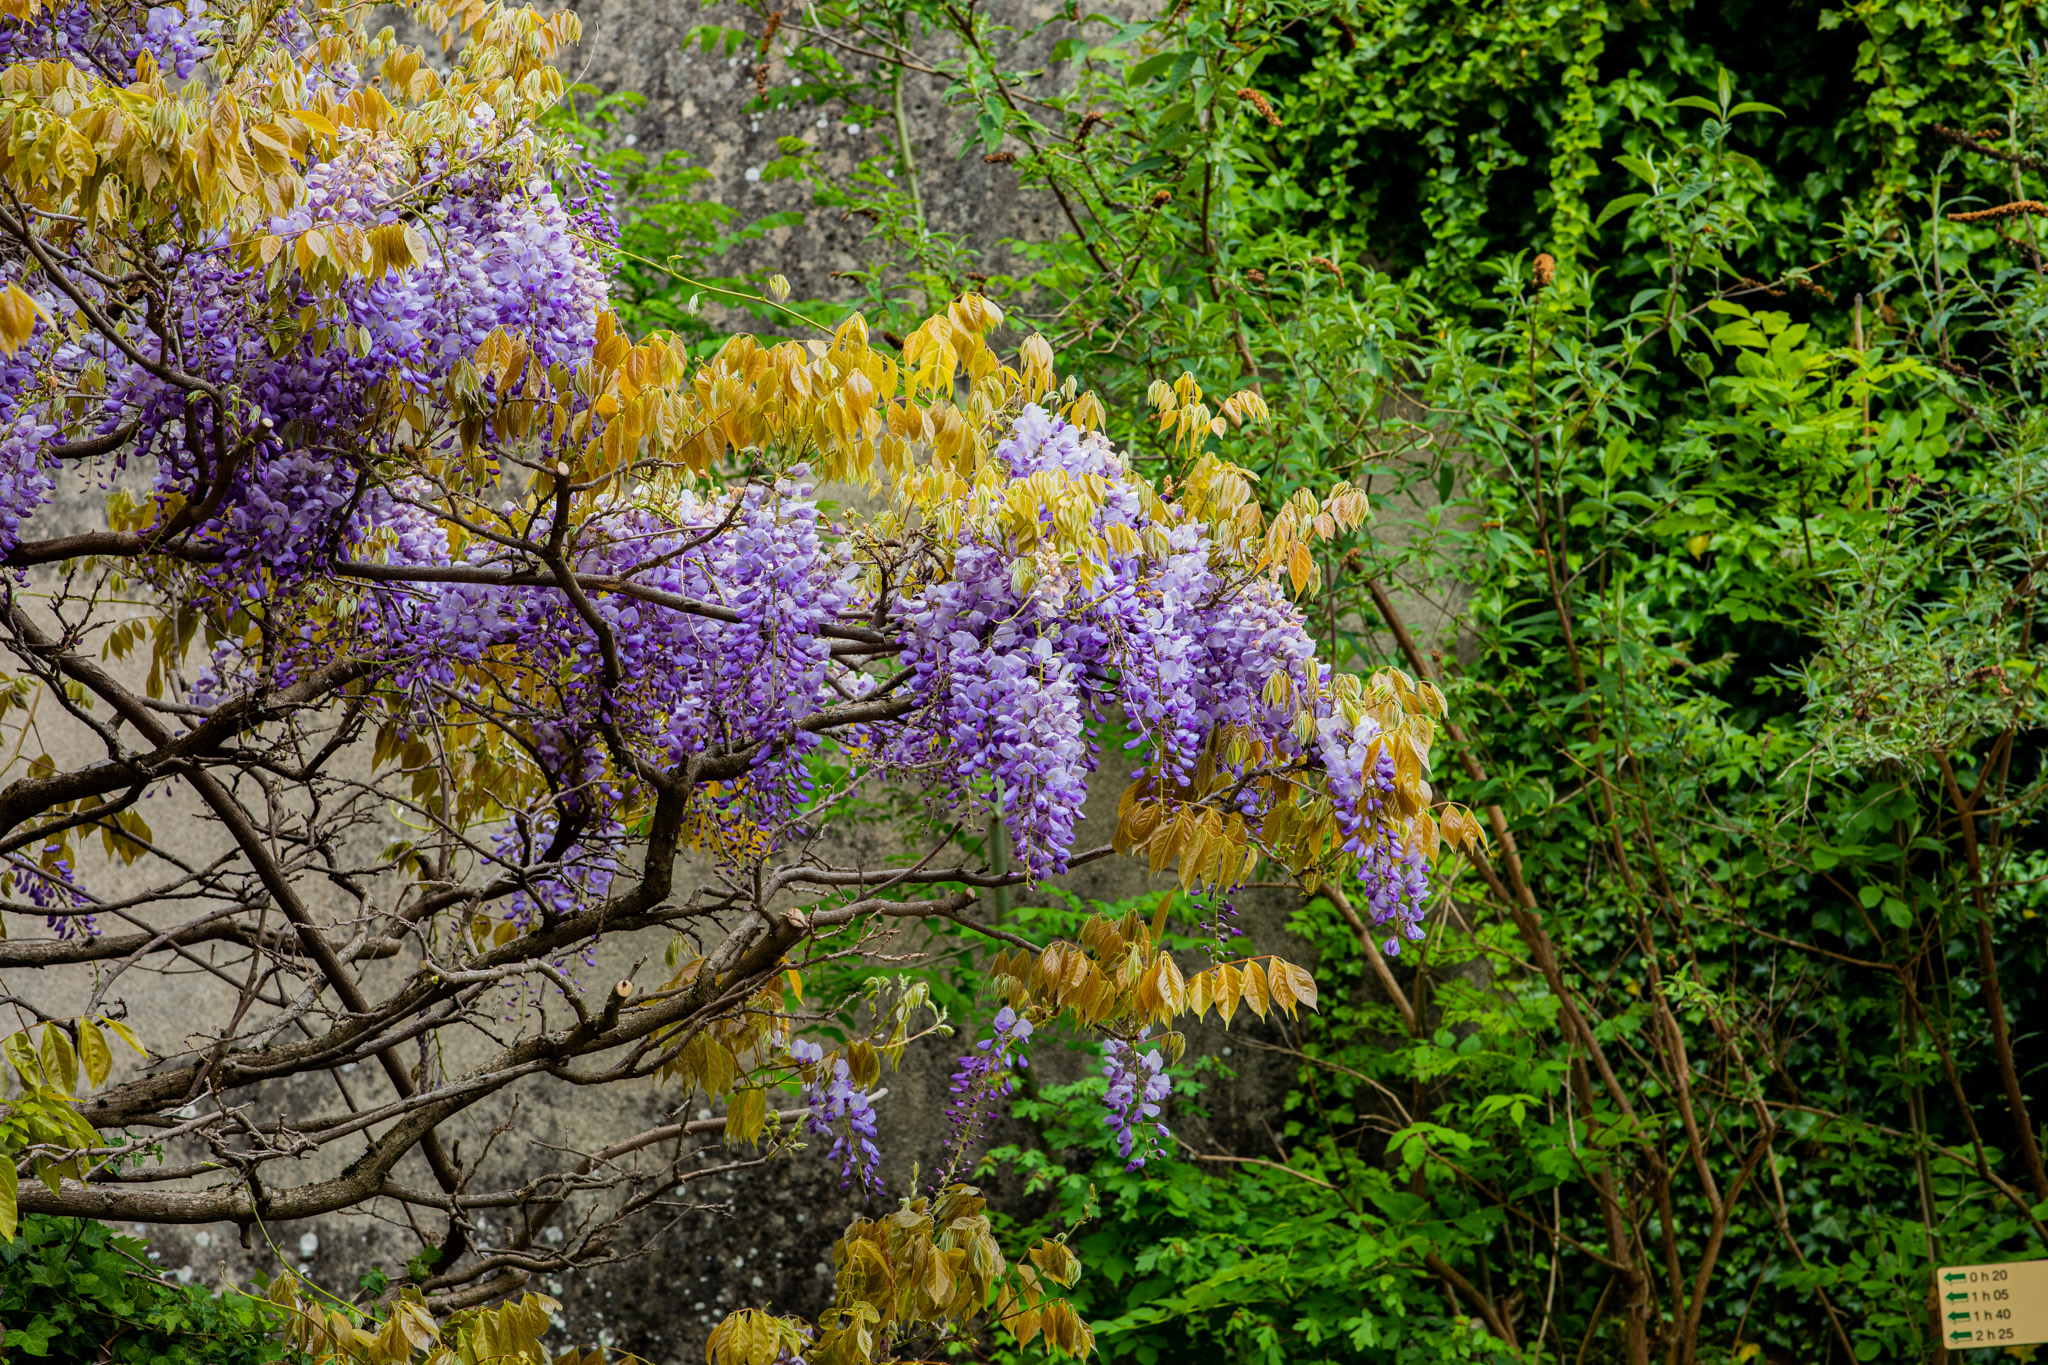 General 2048x1365 photography outdoors nature greenery flowers leaves trees vines shrubs plants wisteria branch